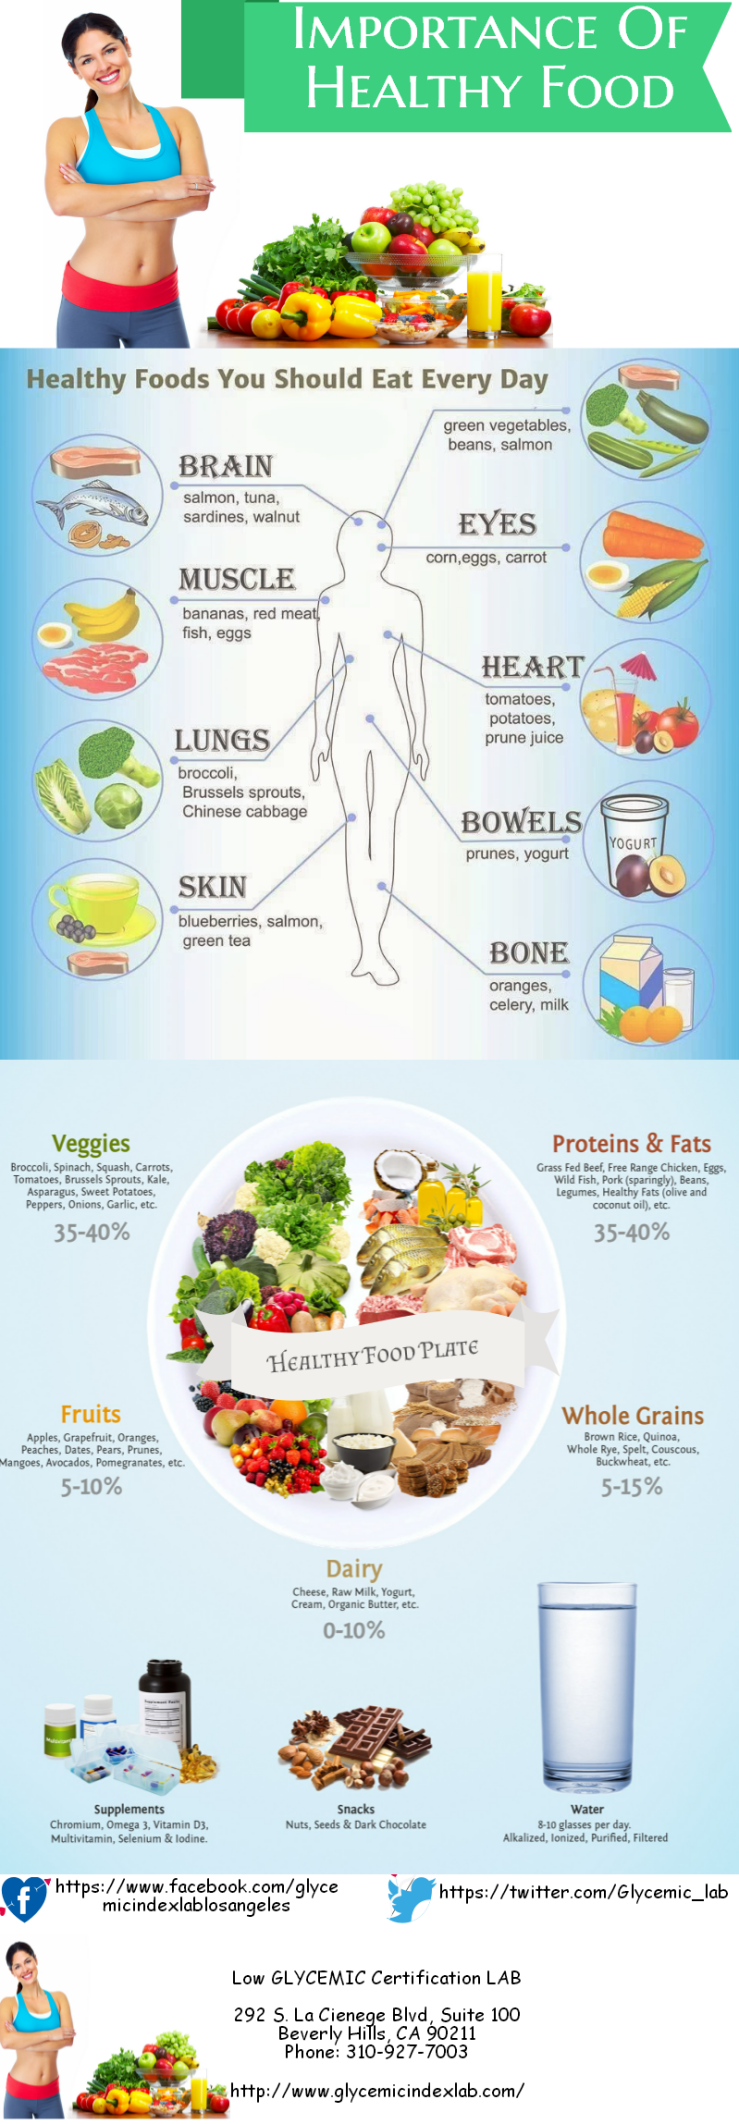 Importance Of Healthy Food(1)